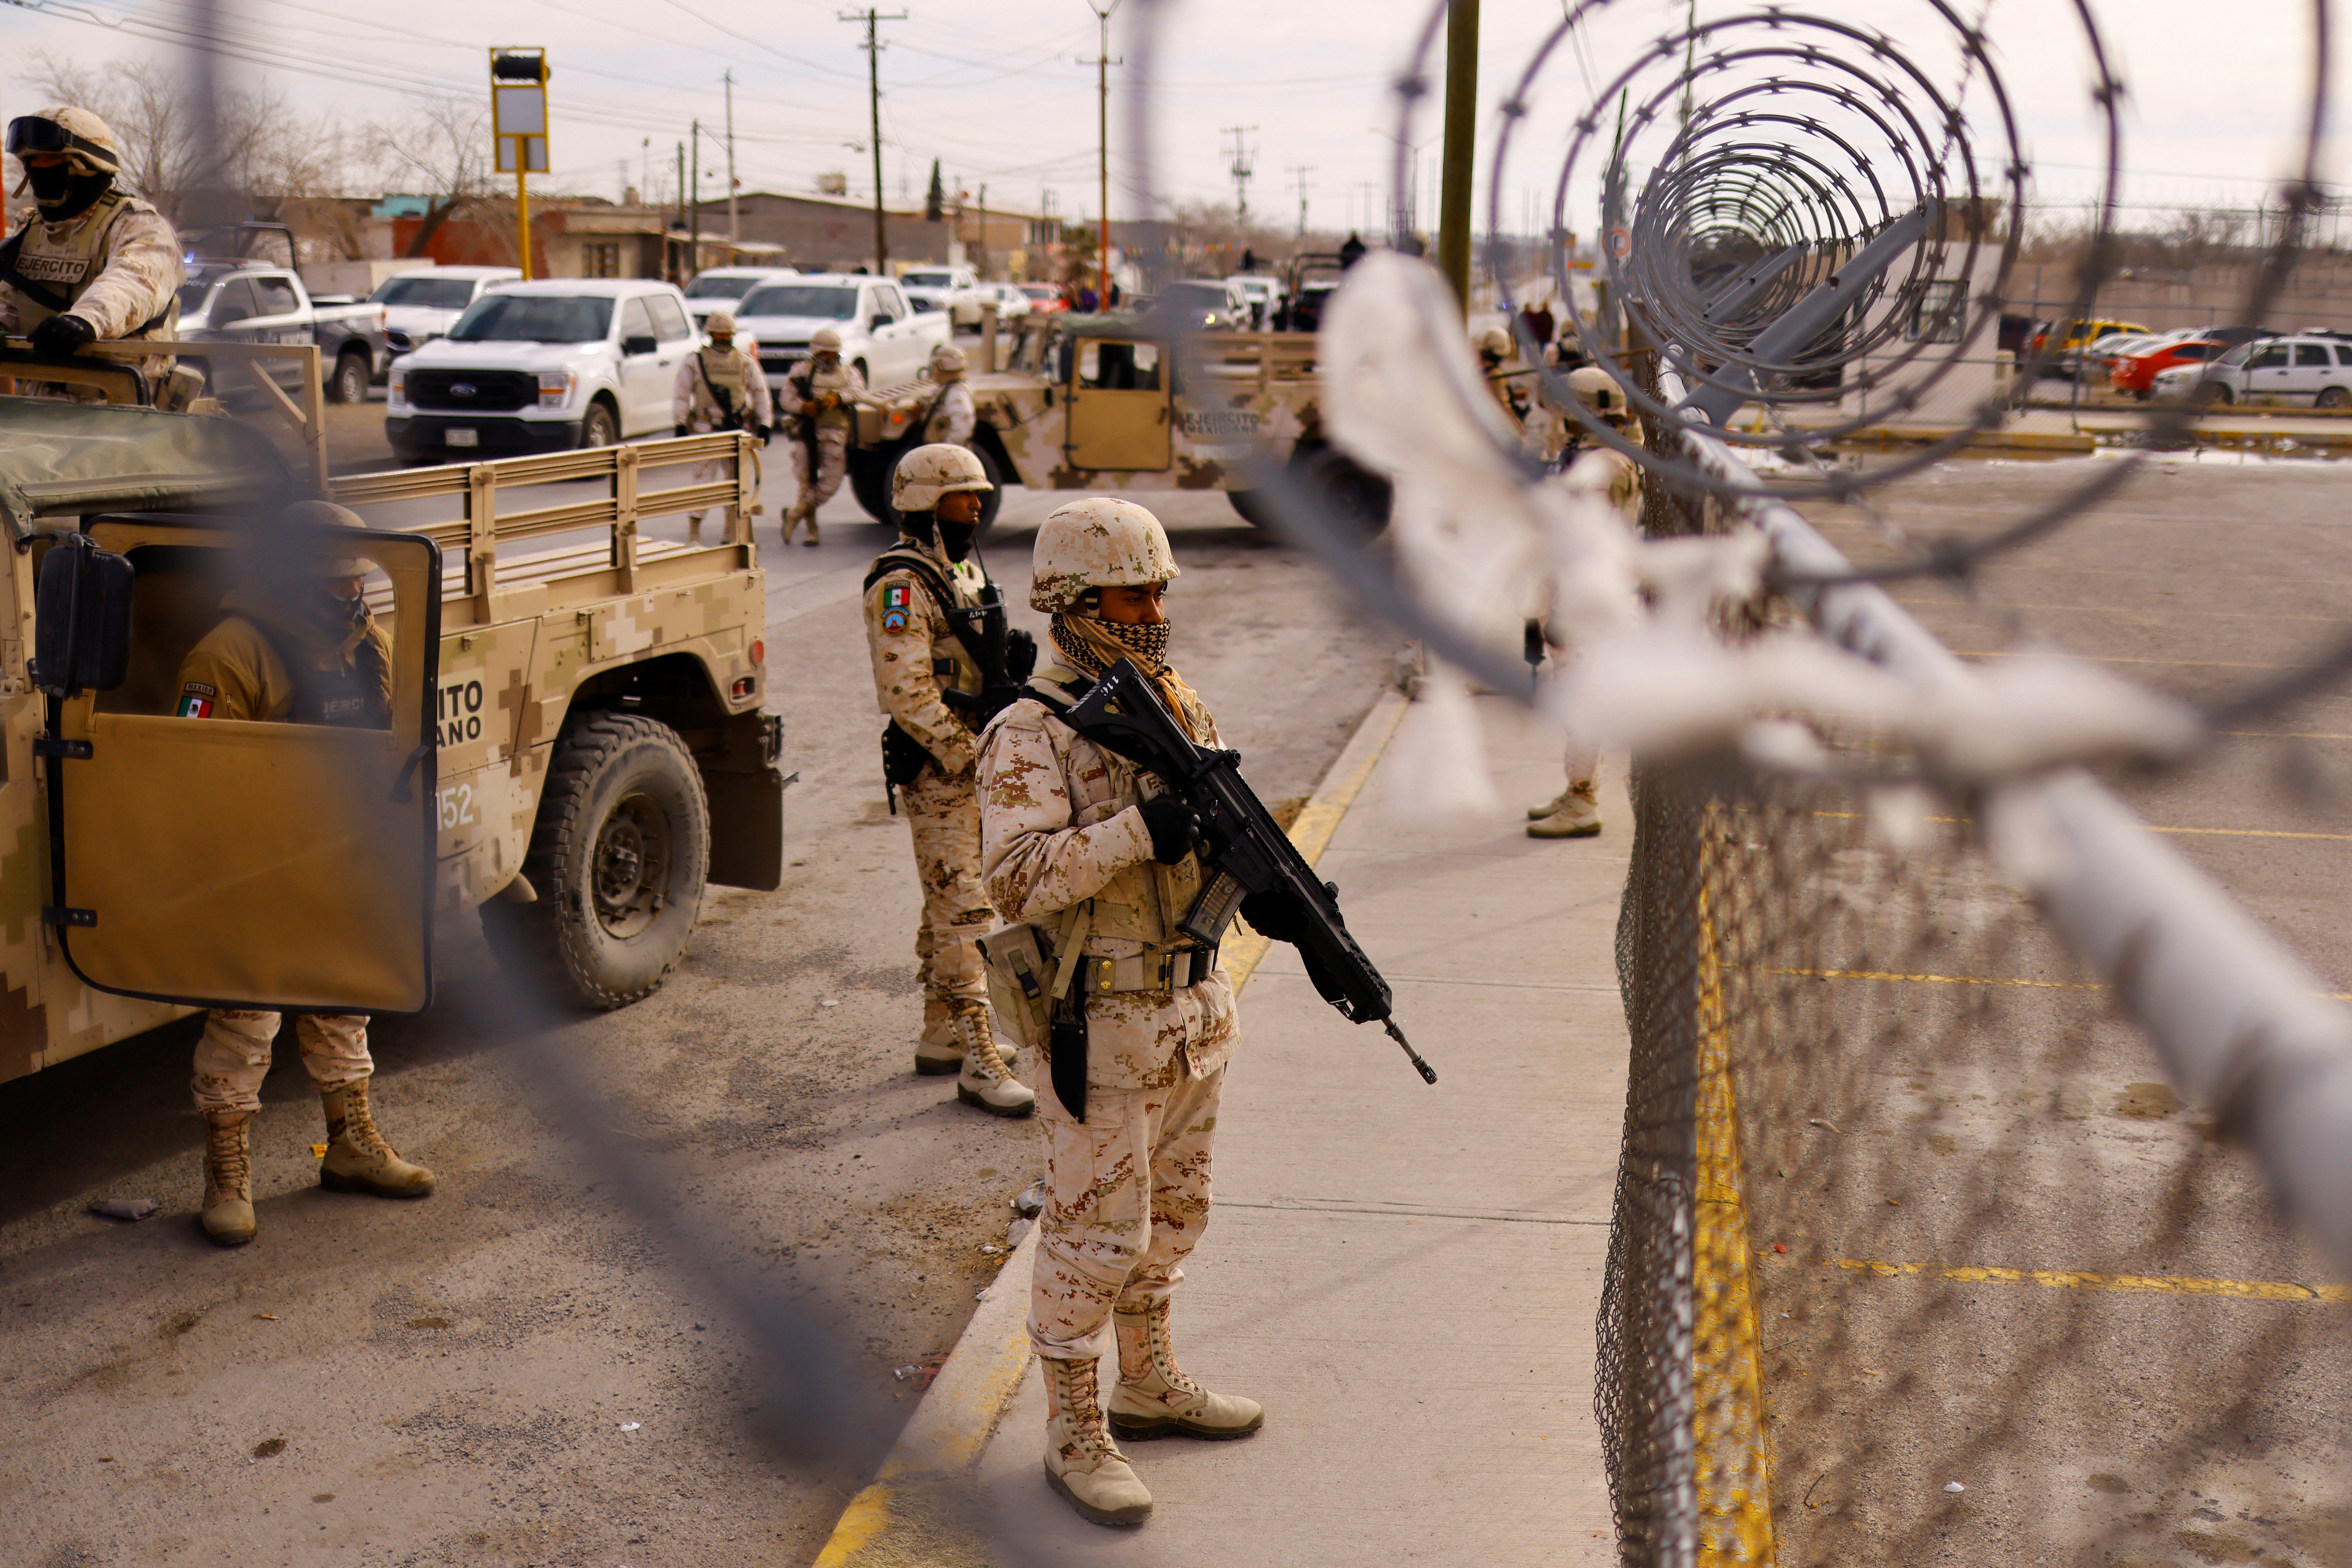 Members of the Mexican Army arrive at Cereso number 3 state prison after unknown assailants entered the prison and freed several inmates, resulting in injuries and deaths, in Ciudad Juarez